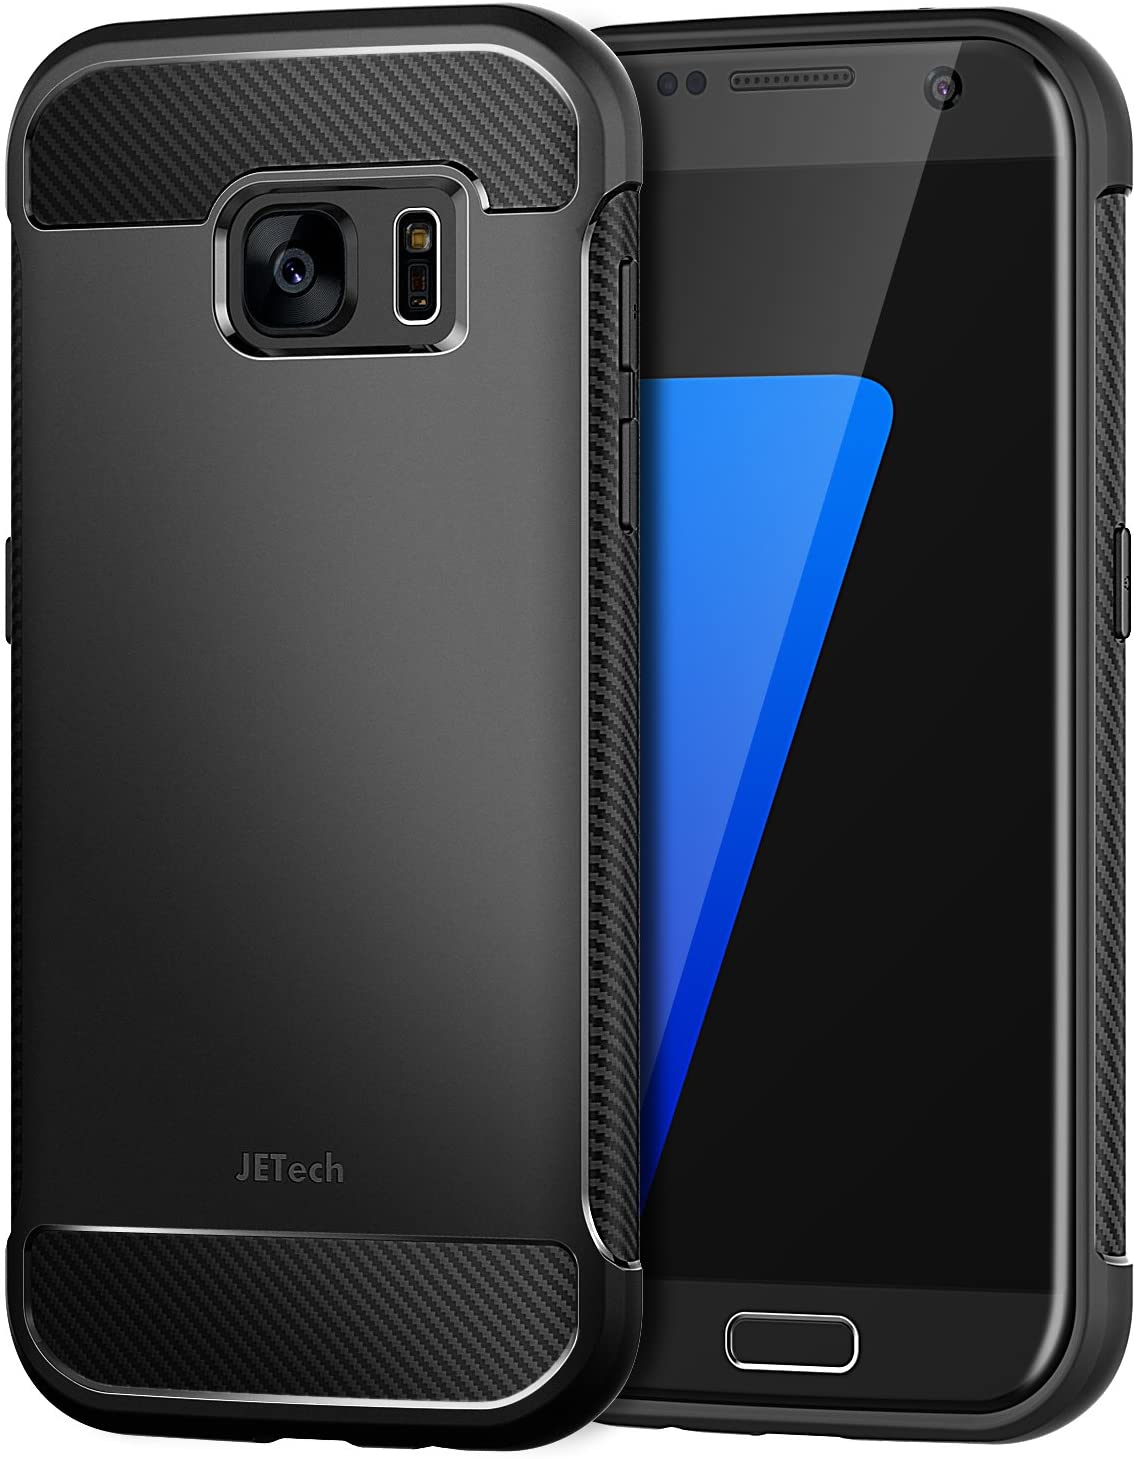 JETech Case for Samsung S7 Protective Cover with Shock-Absorption and Carbon Fiber Design (Black)